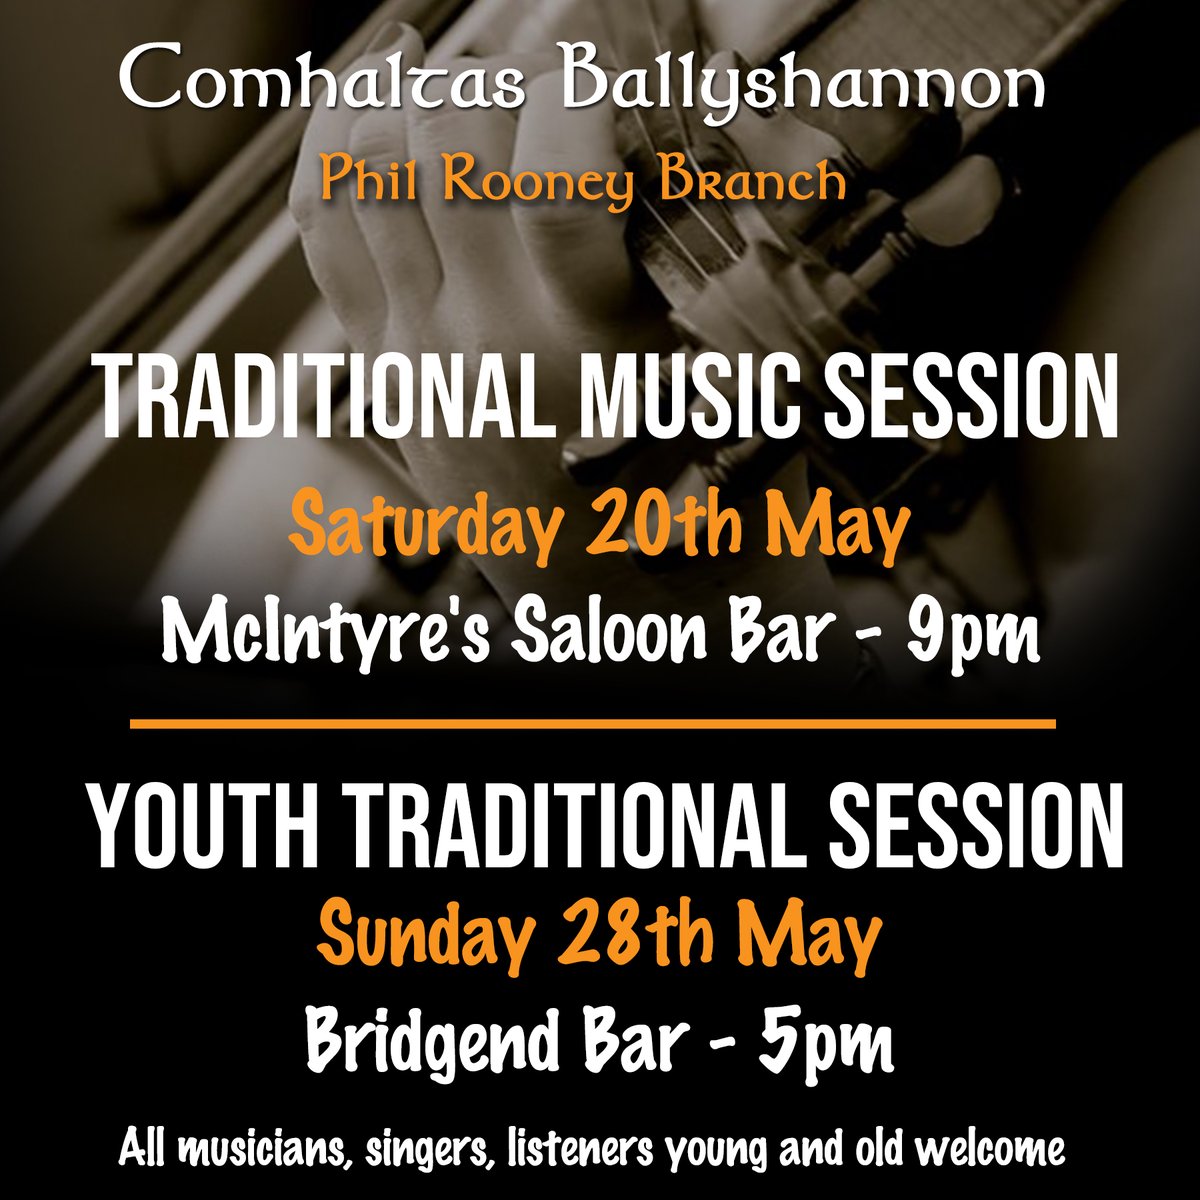 Branch Trad Sessions for May, Tomorrow night (Sat 20th) we will return for the McIntyre Sessions 9pm. All musicians welcome.
Our youth session will take place Sunday 28th, Bridgend Bar 5pm. All levels welcome.
#comhaltas #madfortrad #ballyshannon #tradsession #tradsessions🎶🎻